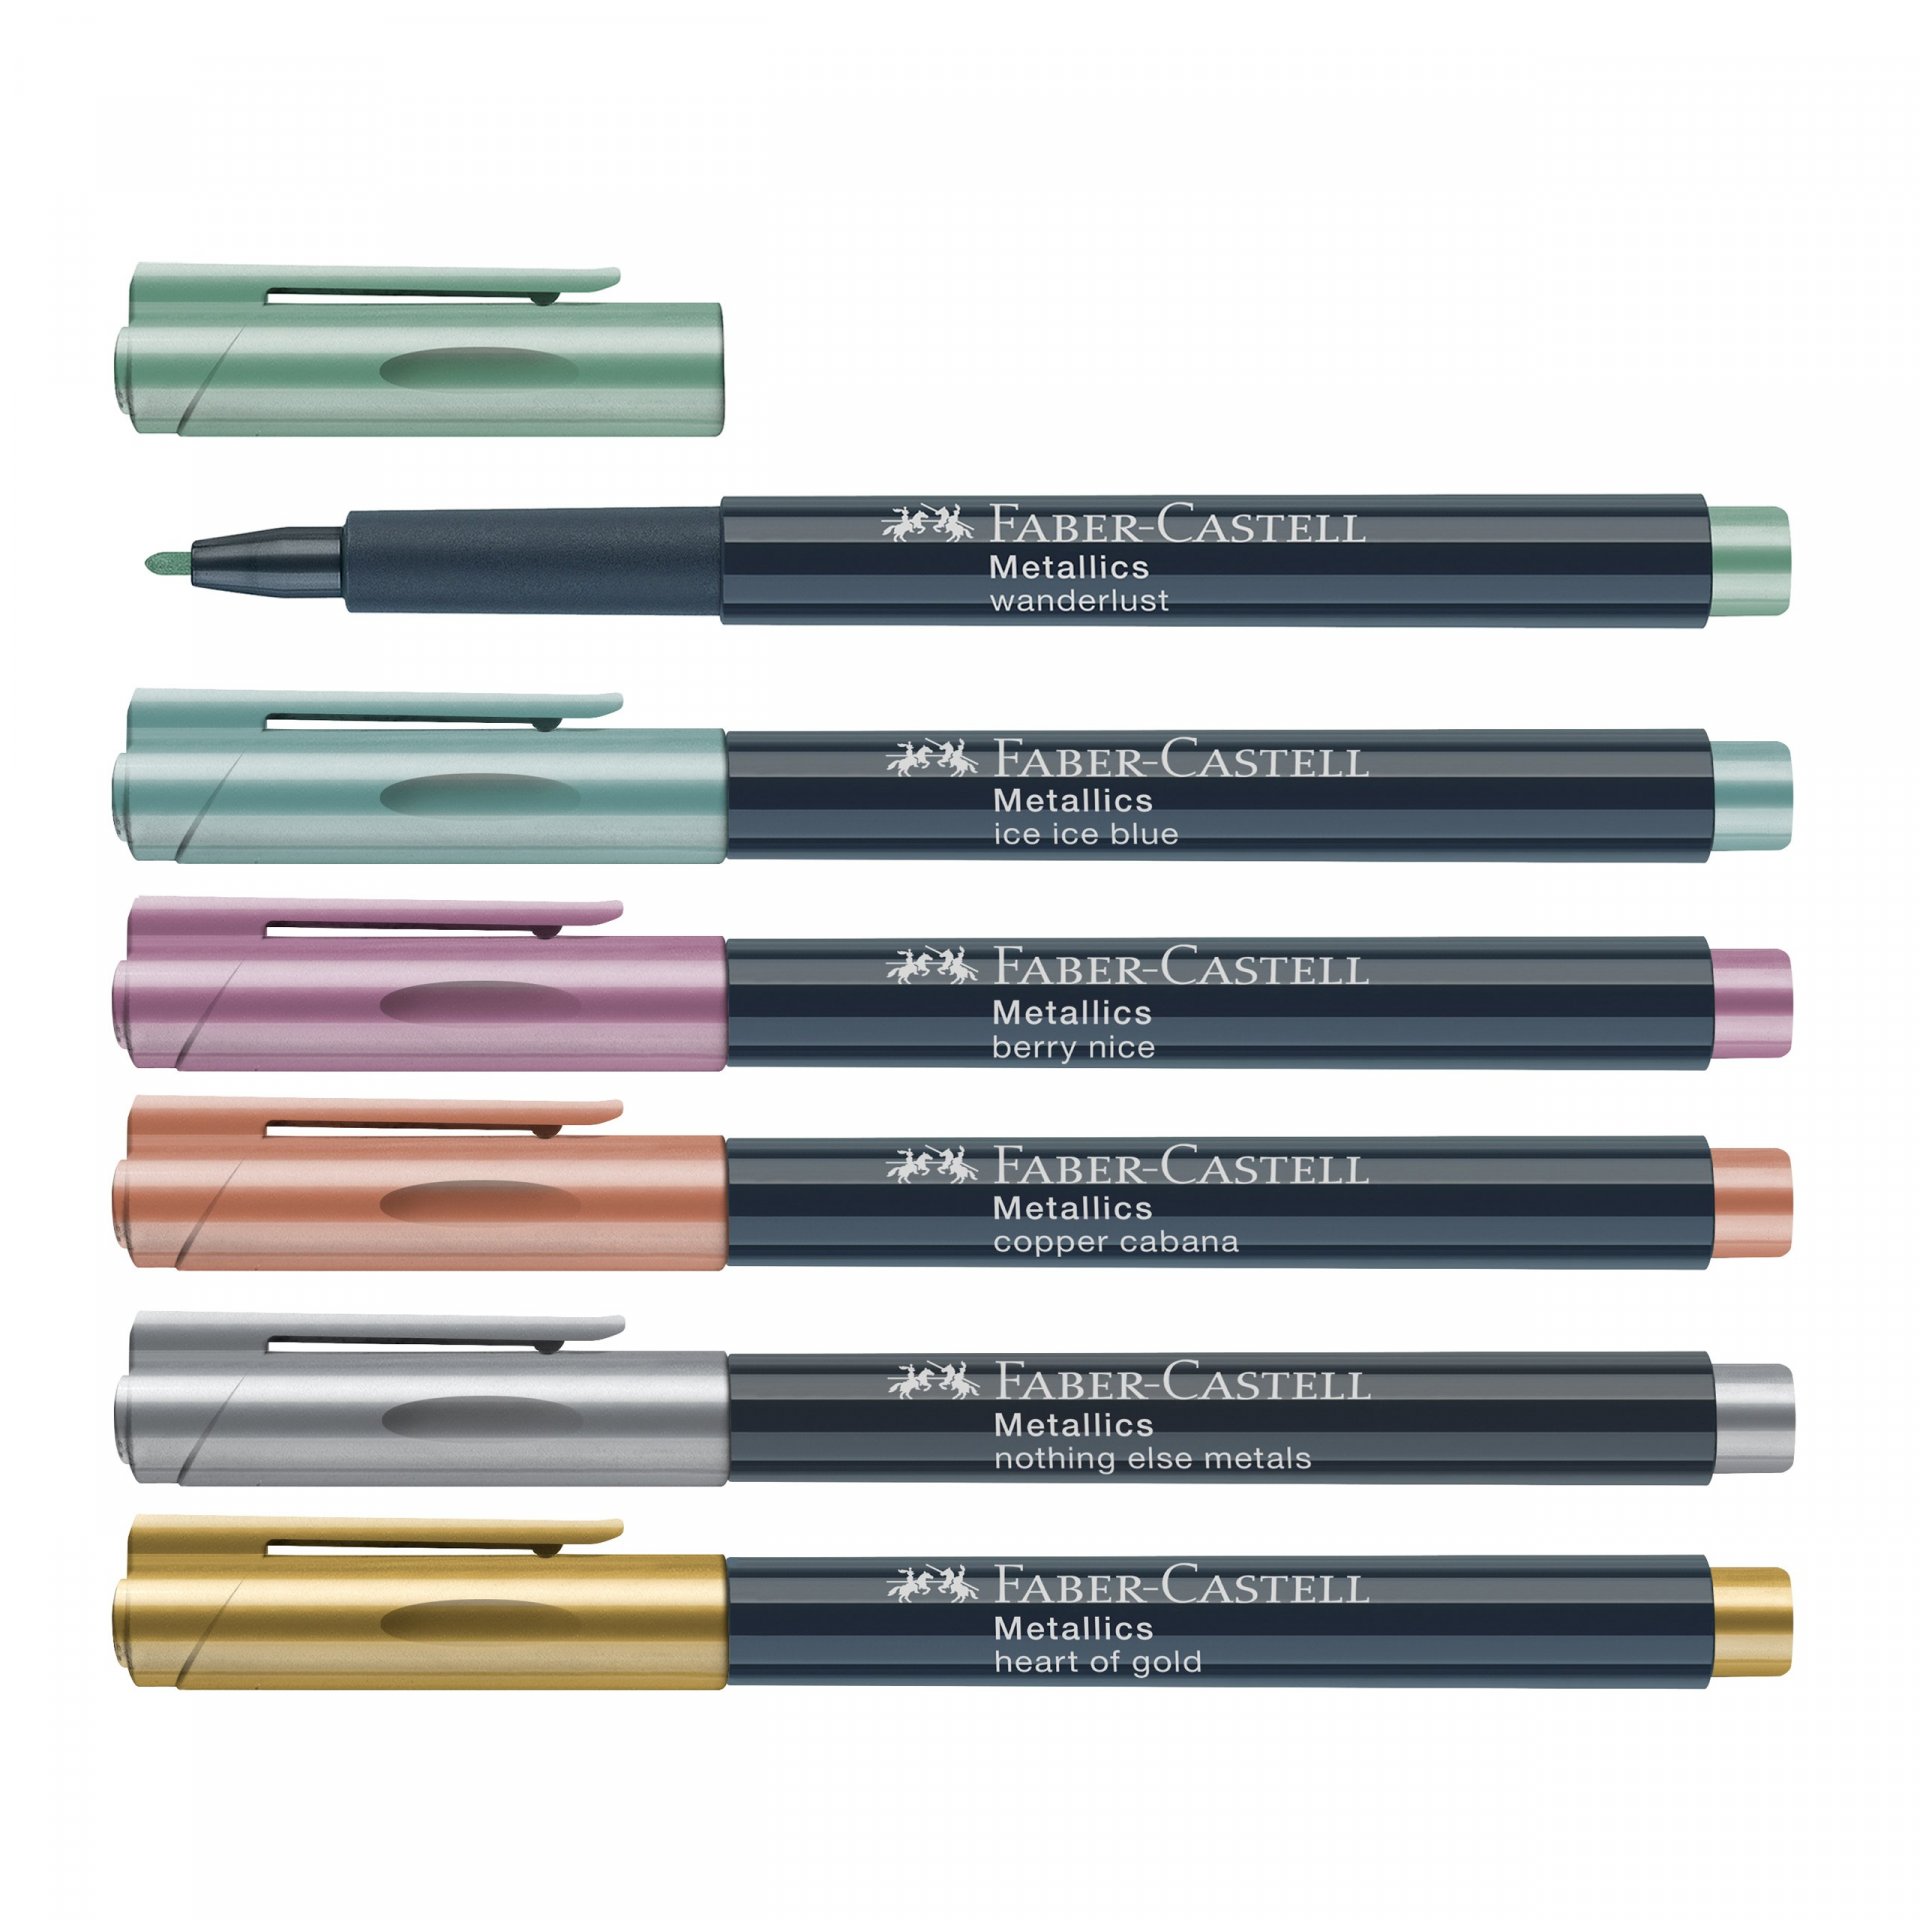 FABER-CASTELL Marcadores Rotuladores Fineliner 30 Colores Faber Castell